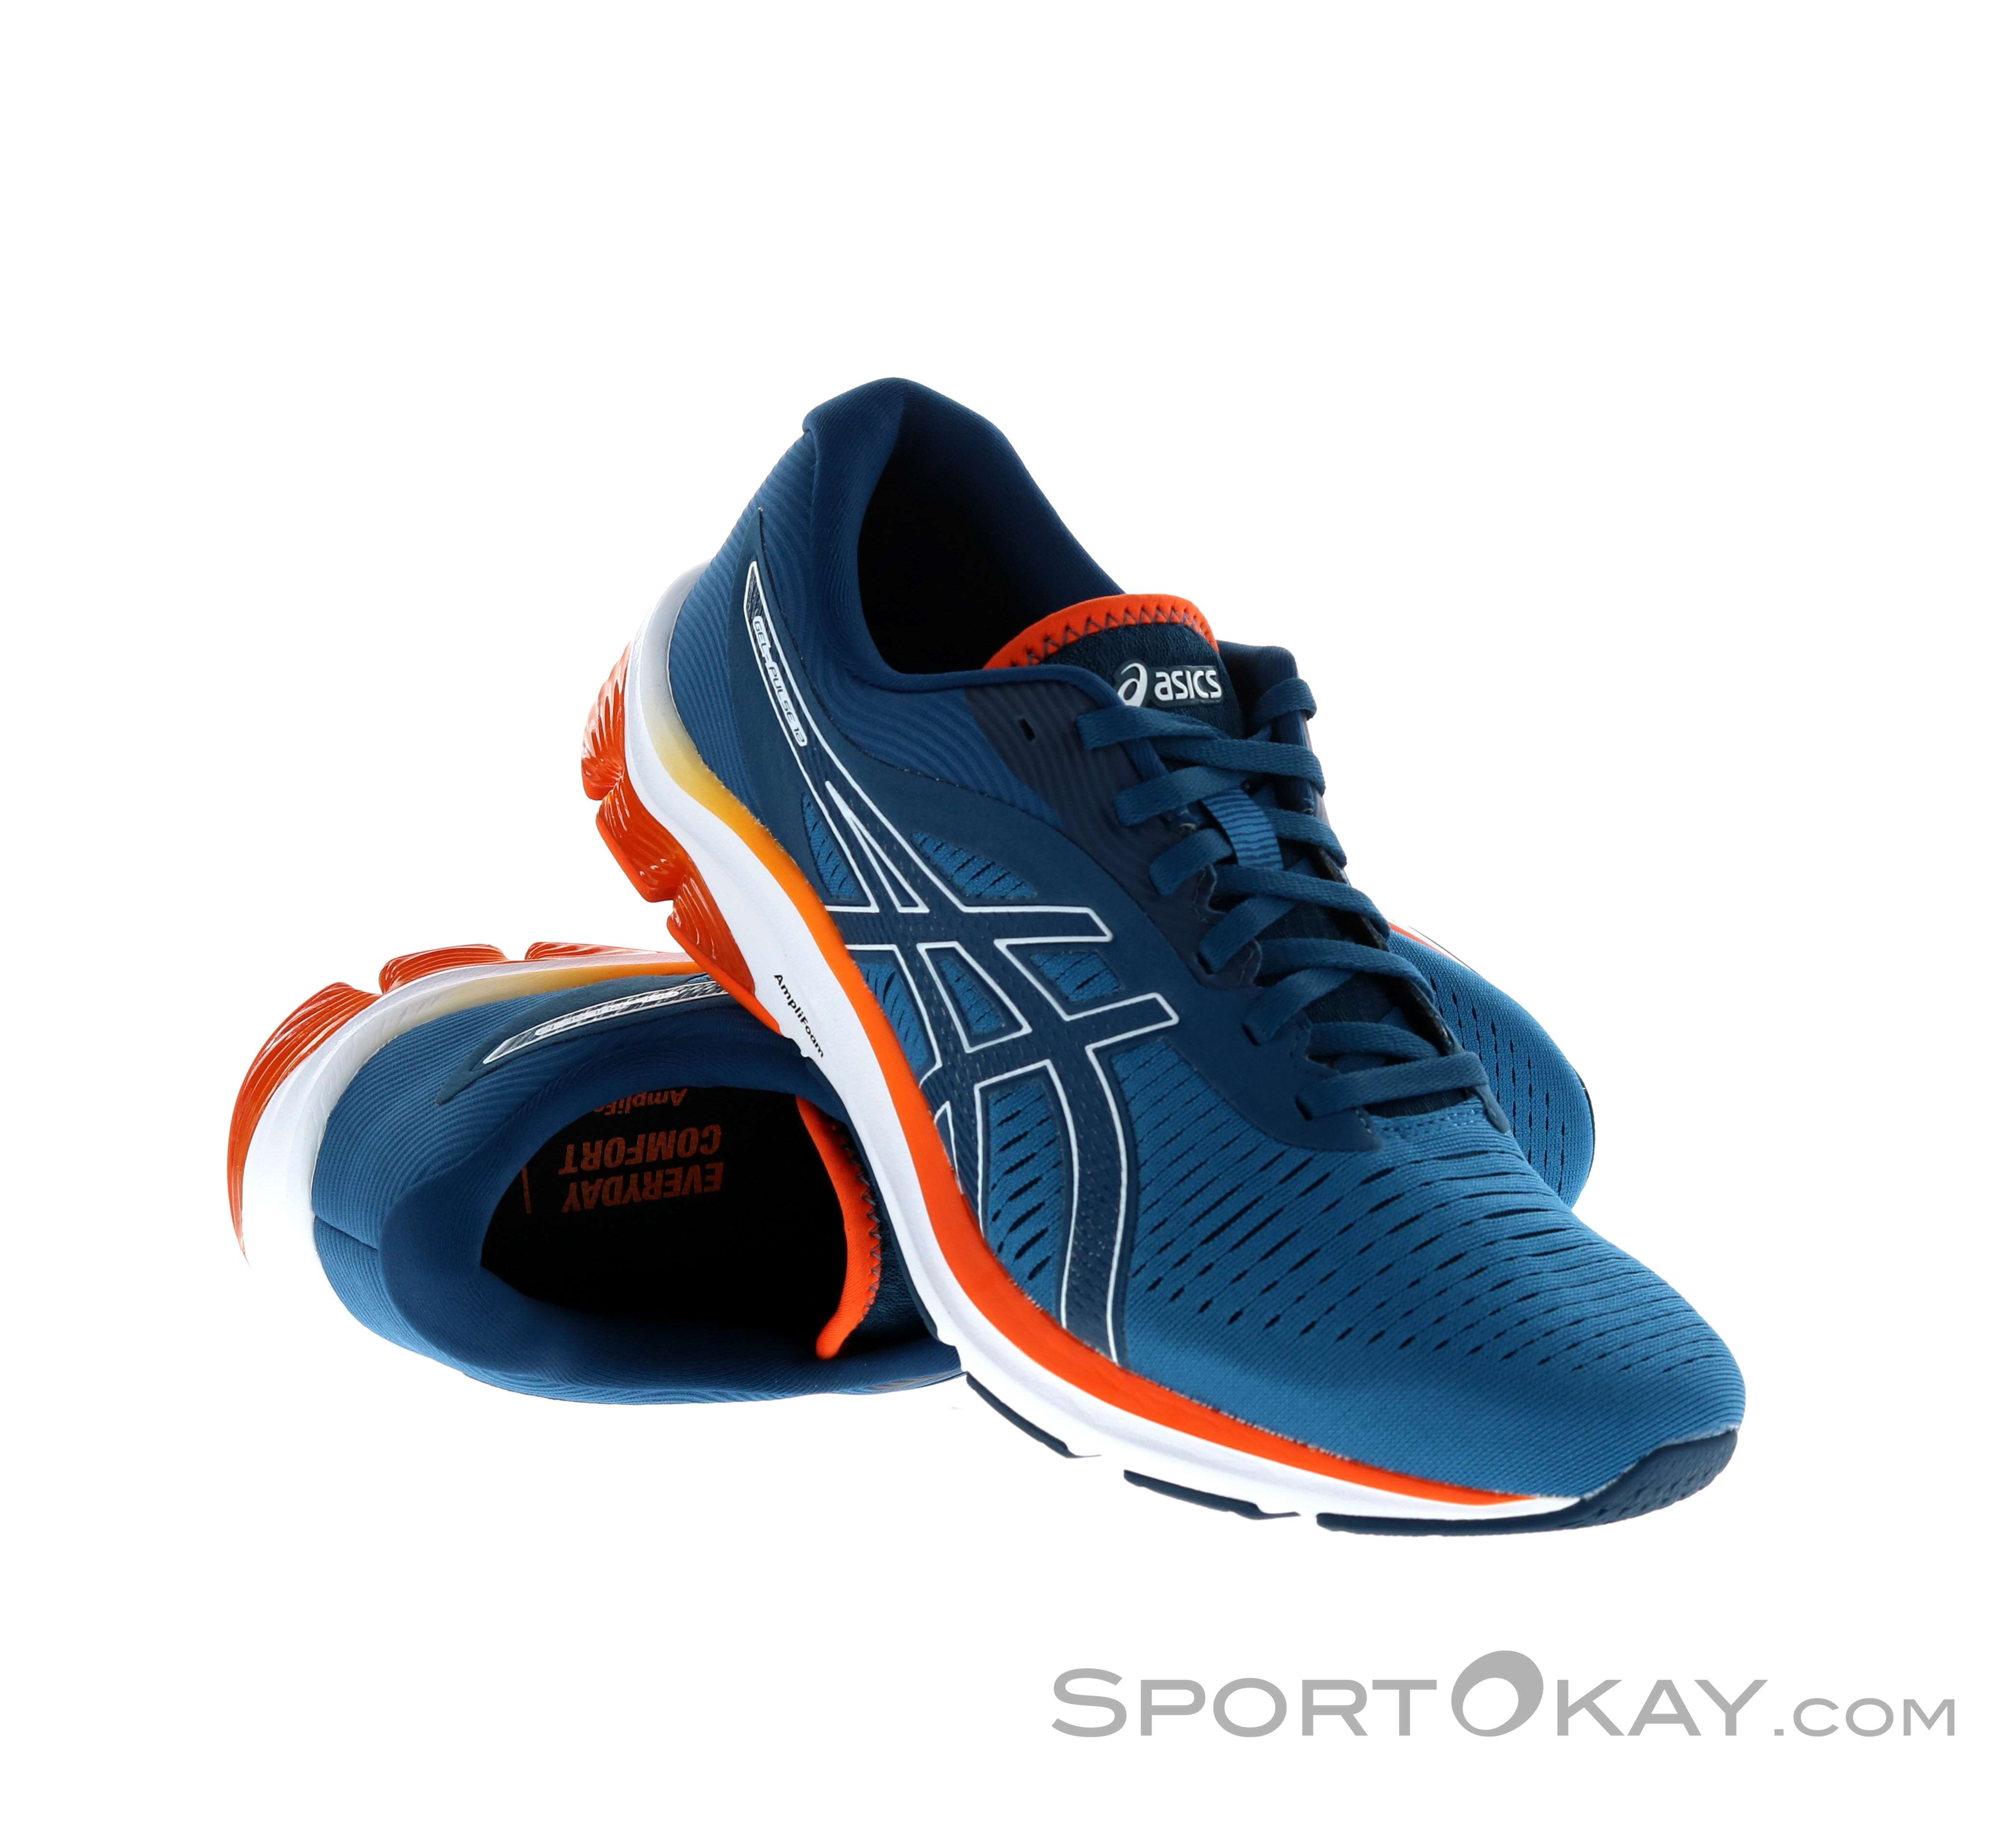 Asics Gel-Pulse 12 Shoes - All-Round Running Shoes - Running Shoes - Running - All